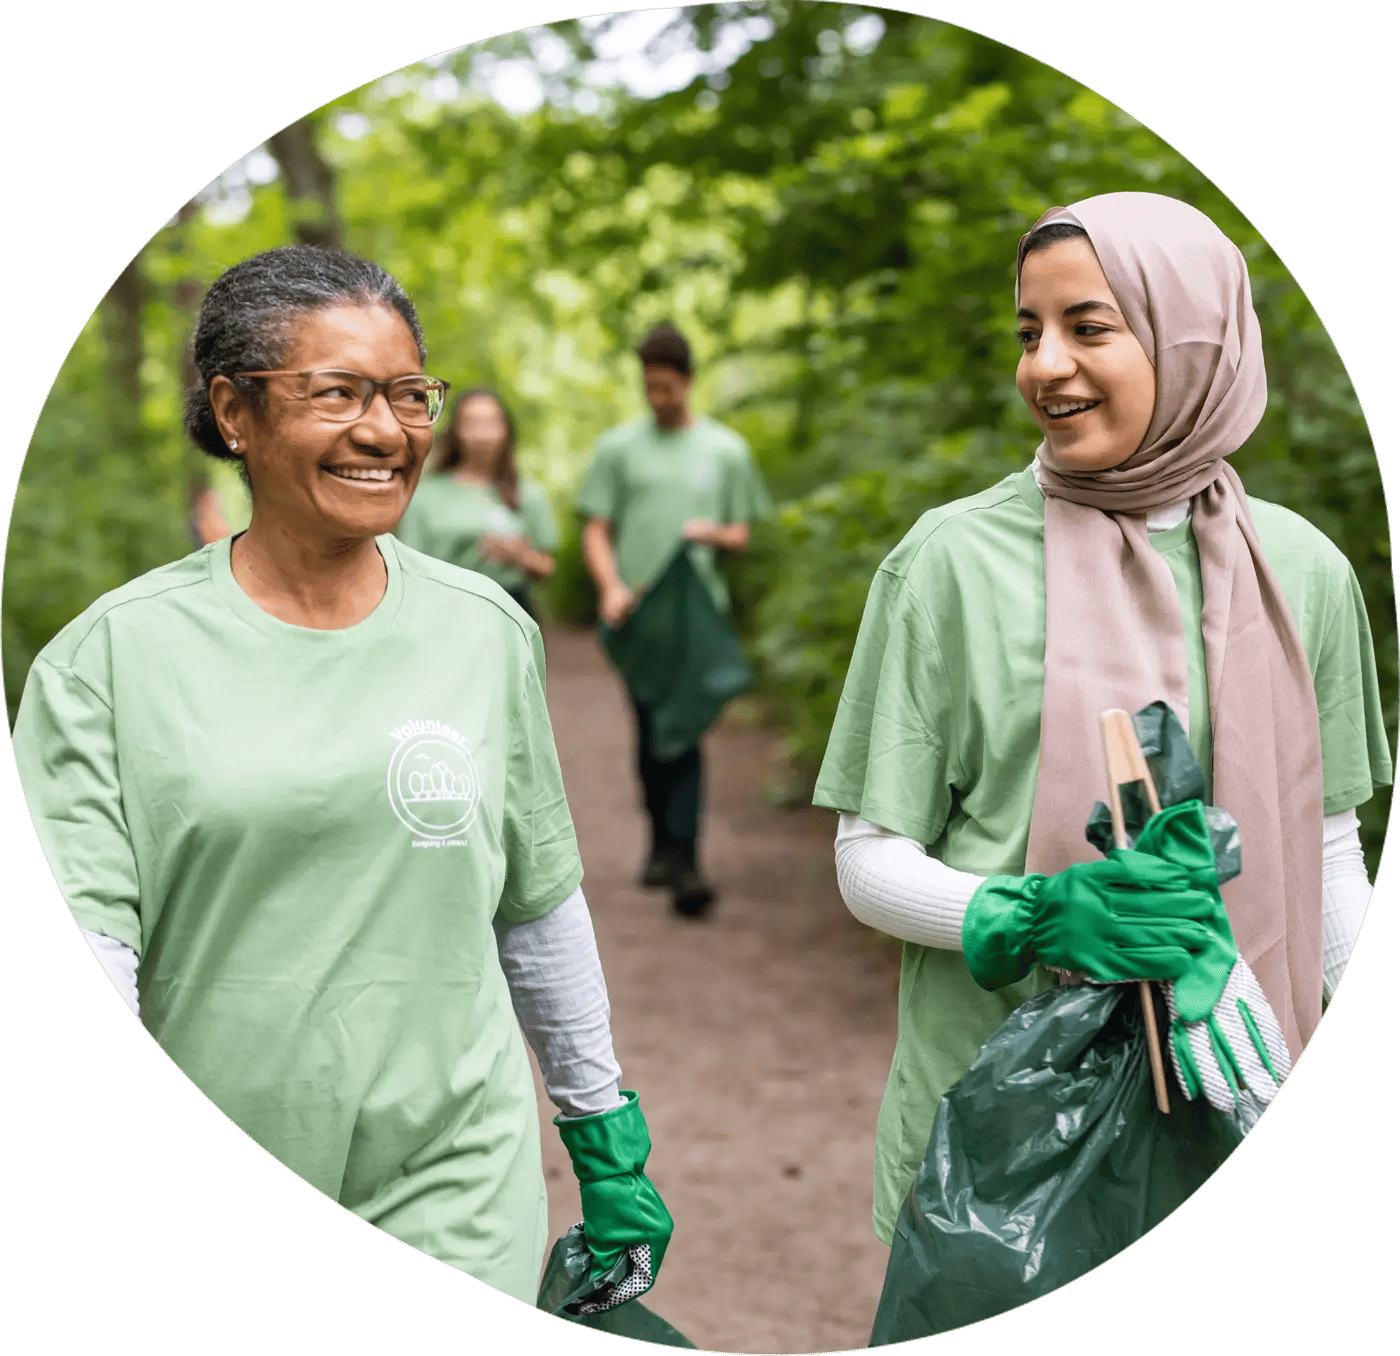 Women volunteering outside picking up garbage in the forest